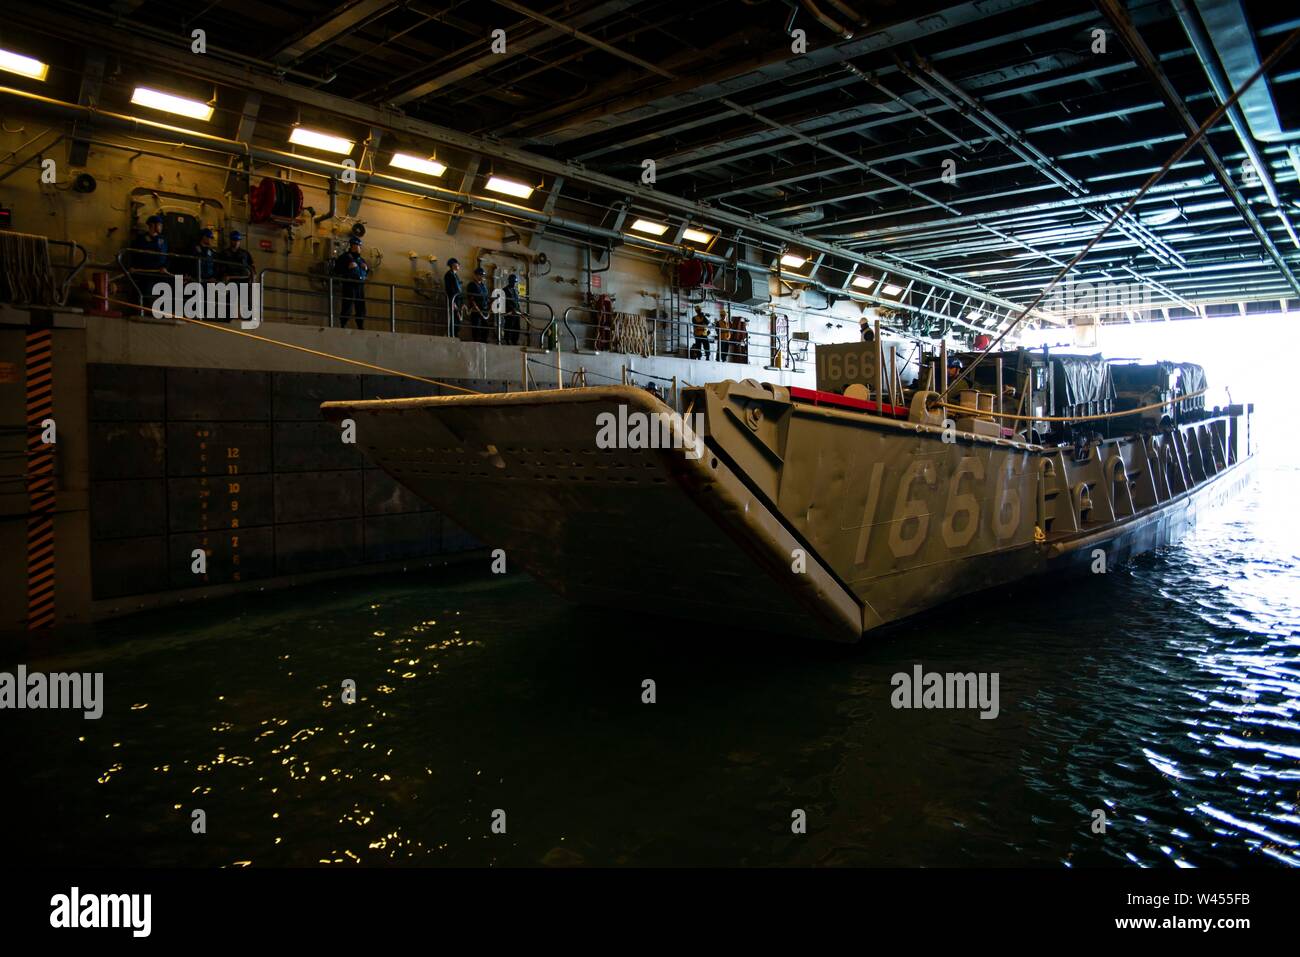 190719-N-DX072-1004 STANAGE BAY, Australia (July 19, 2019) Landing Craft, Utility (LCU) 1666 prepares to depart the well deck of the amphibious transport dock ship USS Green Bay (LPD 20). Green Bay, part of the Wasp Expeditionary Strike Group, with embarked 31st Marine Expeditionary Unit, is currently participating in Talisman Sabre 2019 off the coast of Northern Australia. A bilateral, biennial event, Talisman Sabre is designed to improve U.S. and Australian combat training, readiness and interoperability through realistic, relevant training necessary to maintain regional security, peace and Stock Photo